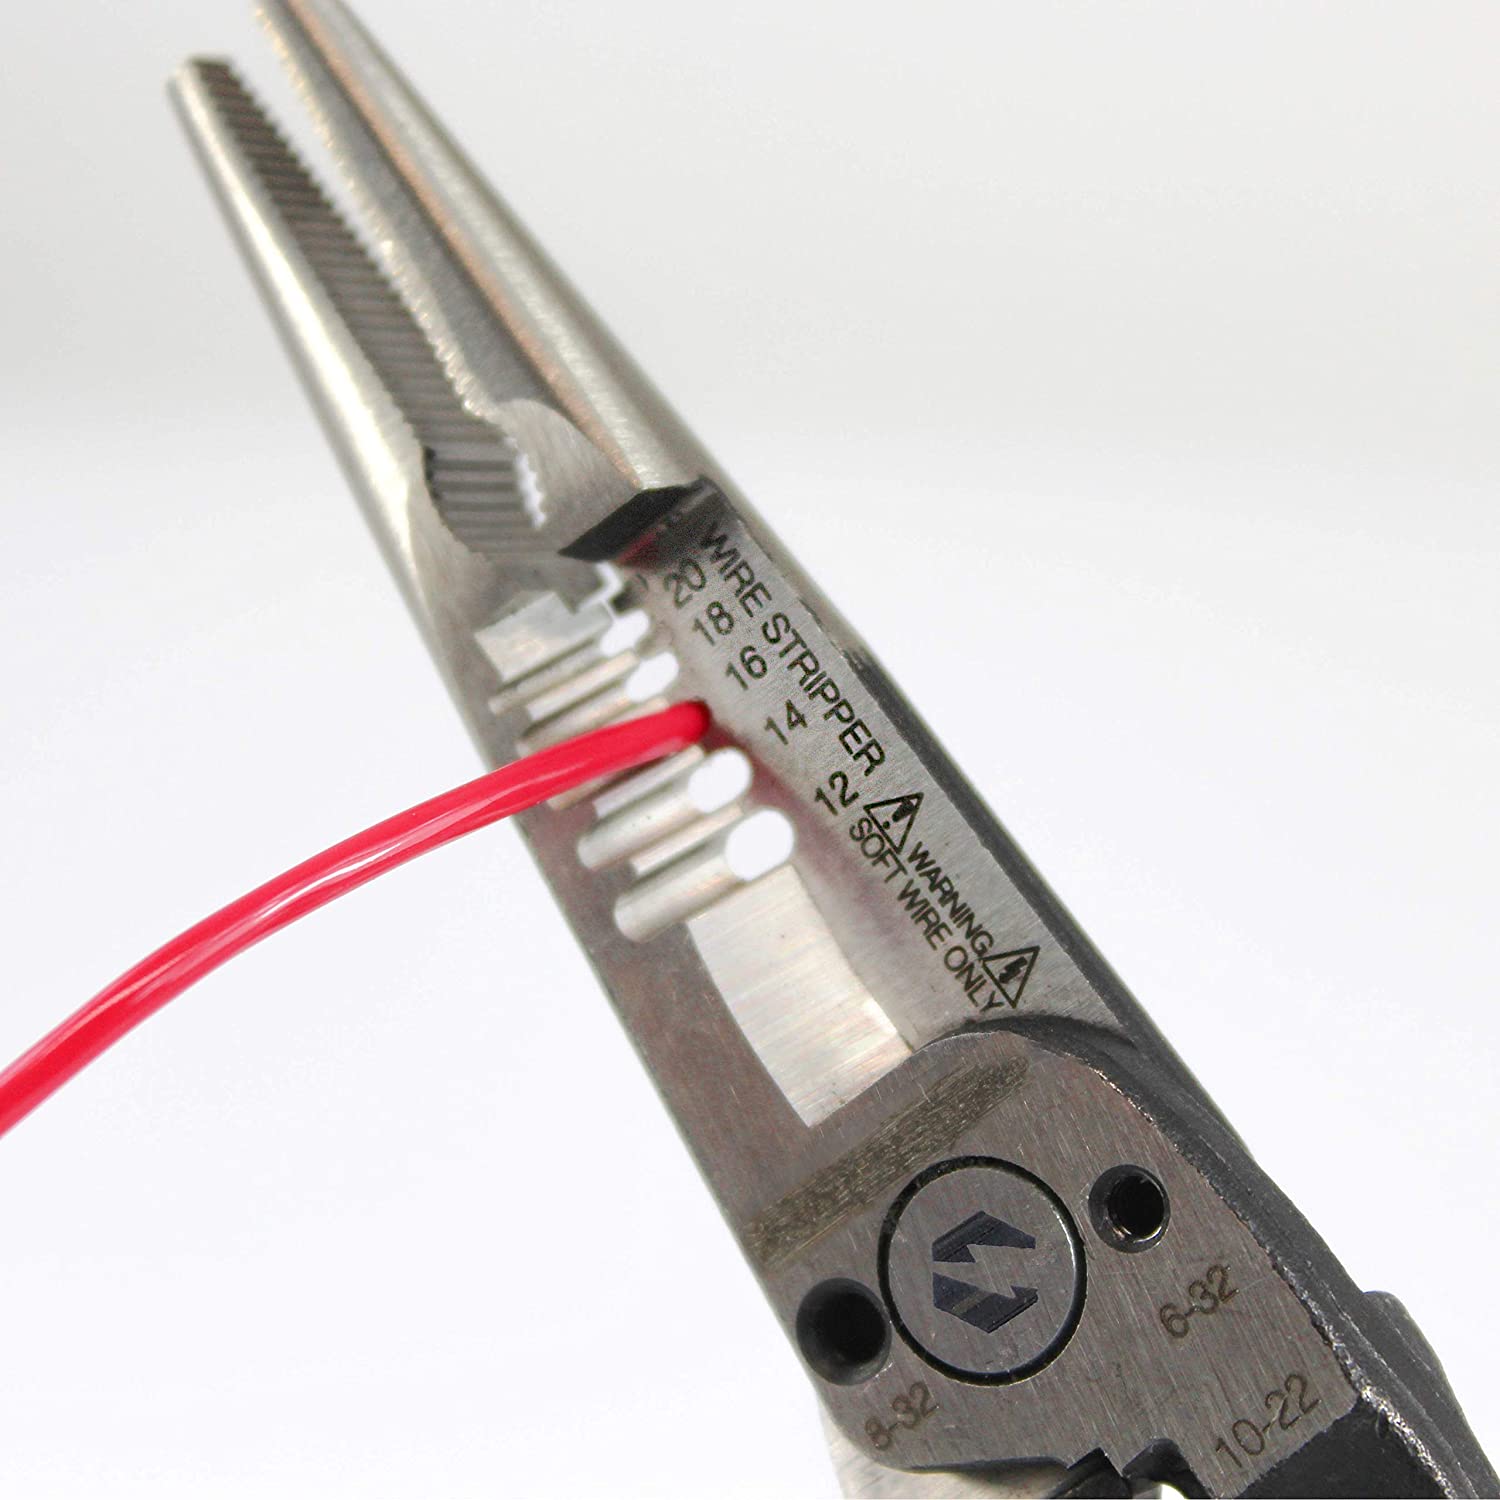 EZ RED PG5 5-in-1 Multi-Purpose Electrical/Automotive Stripper. Cutter. Crimper. Pliers. Extractor. Red - MPR Tools & Equipment